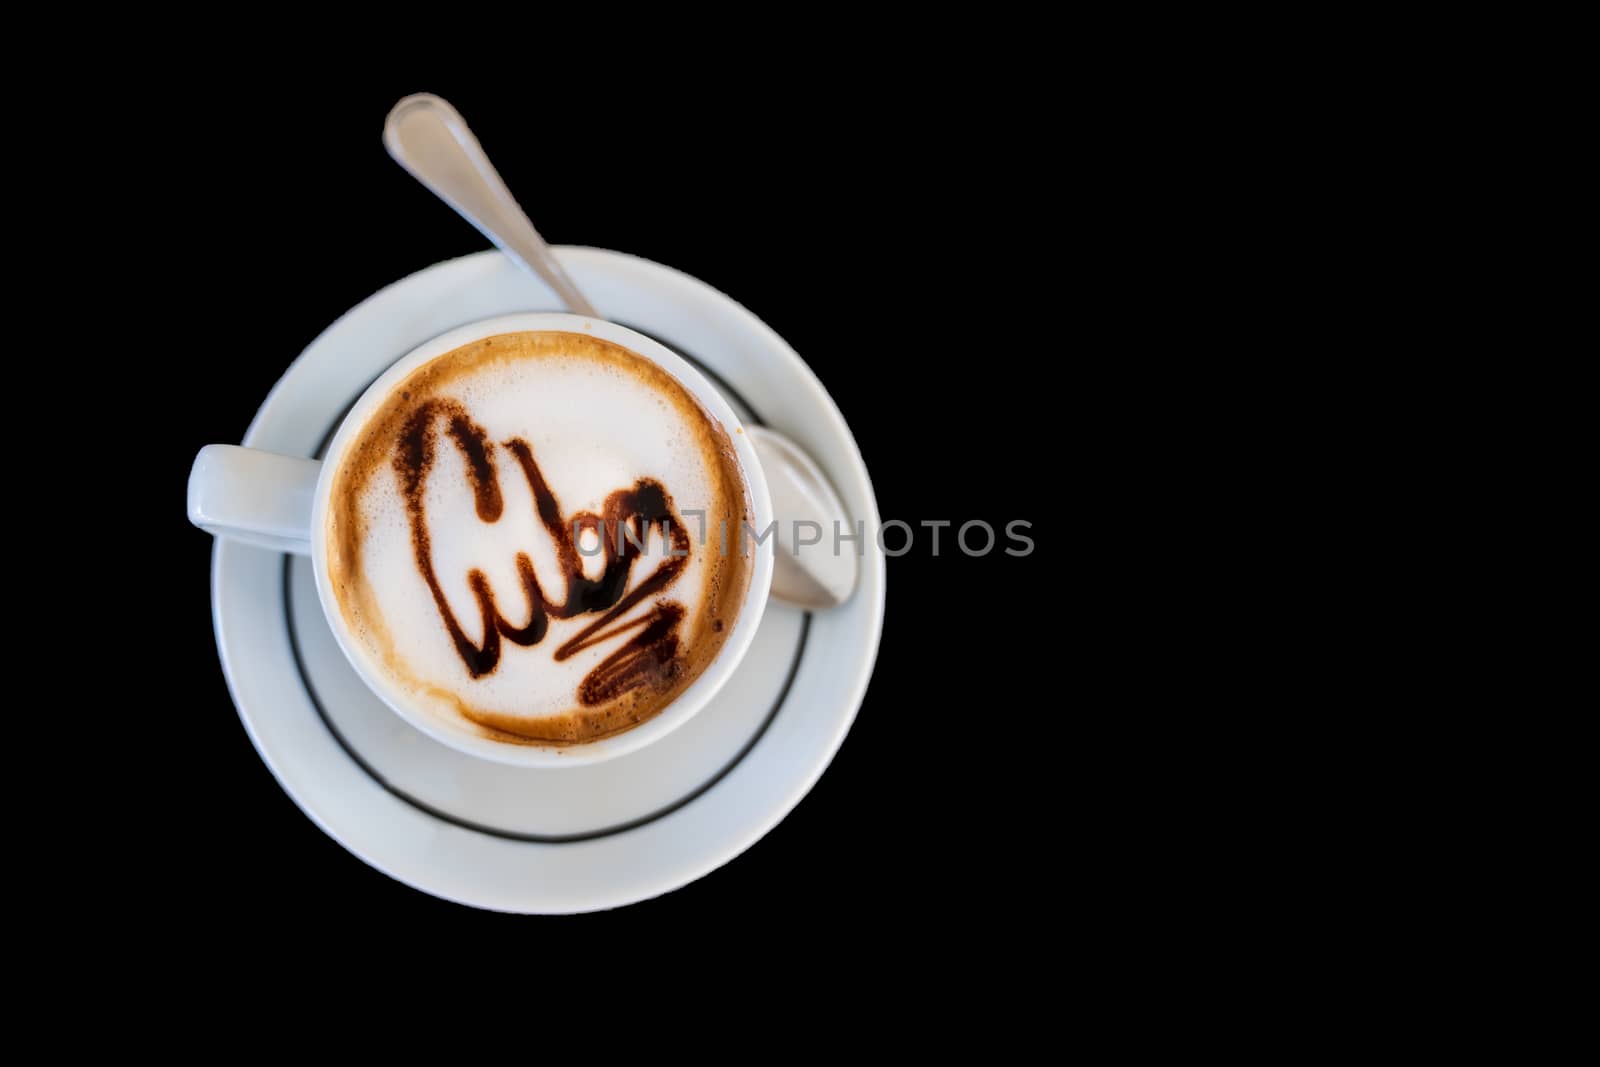 Cappuccino on a cup with foam and above the foam the inscription Cuba on a black background